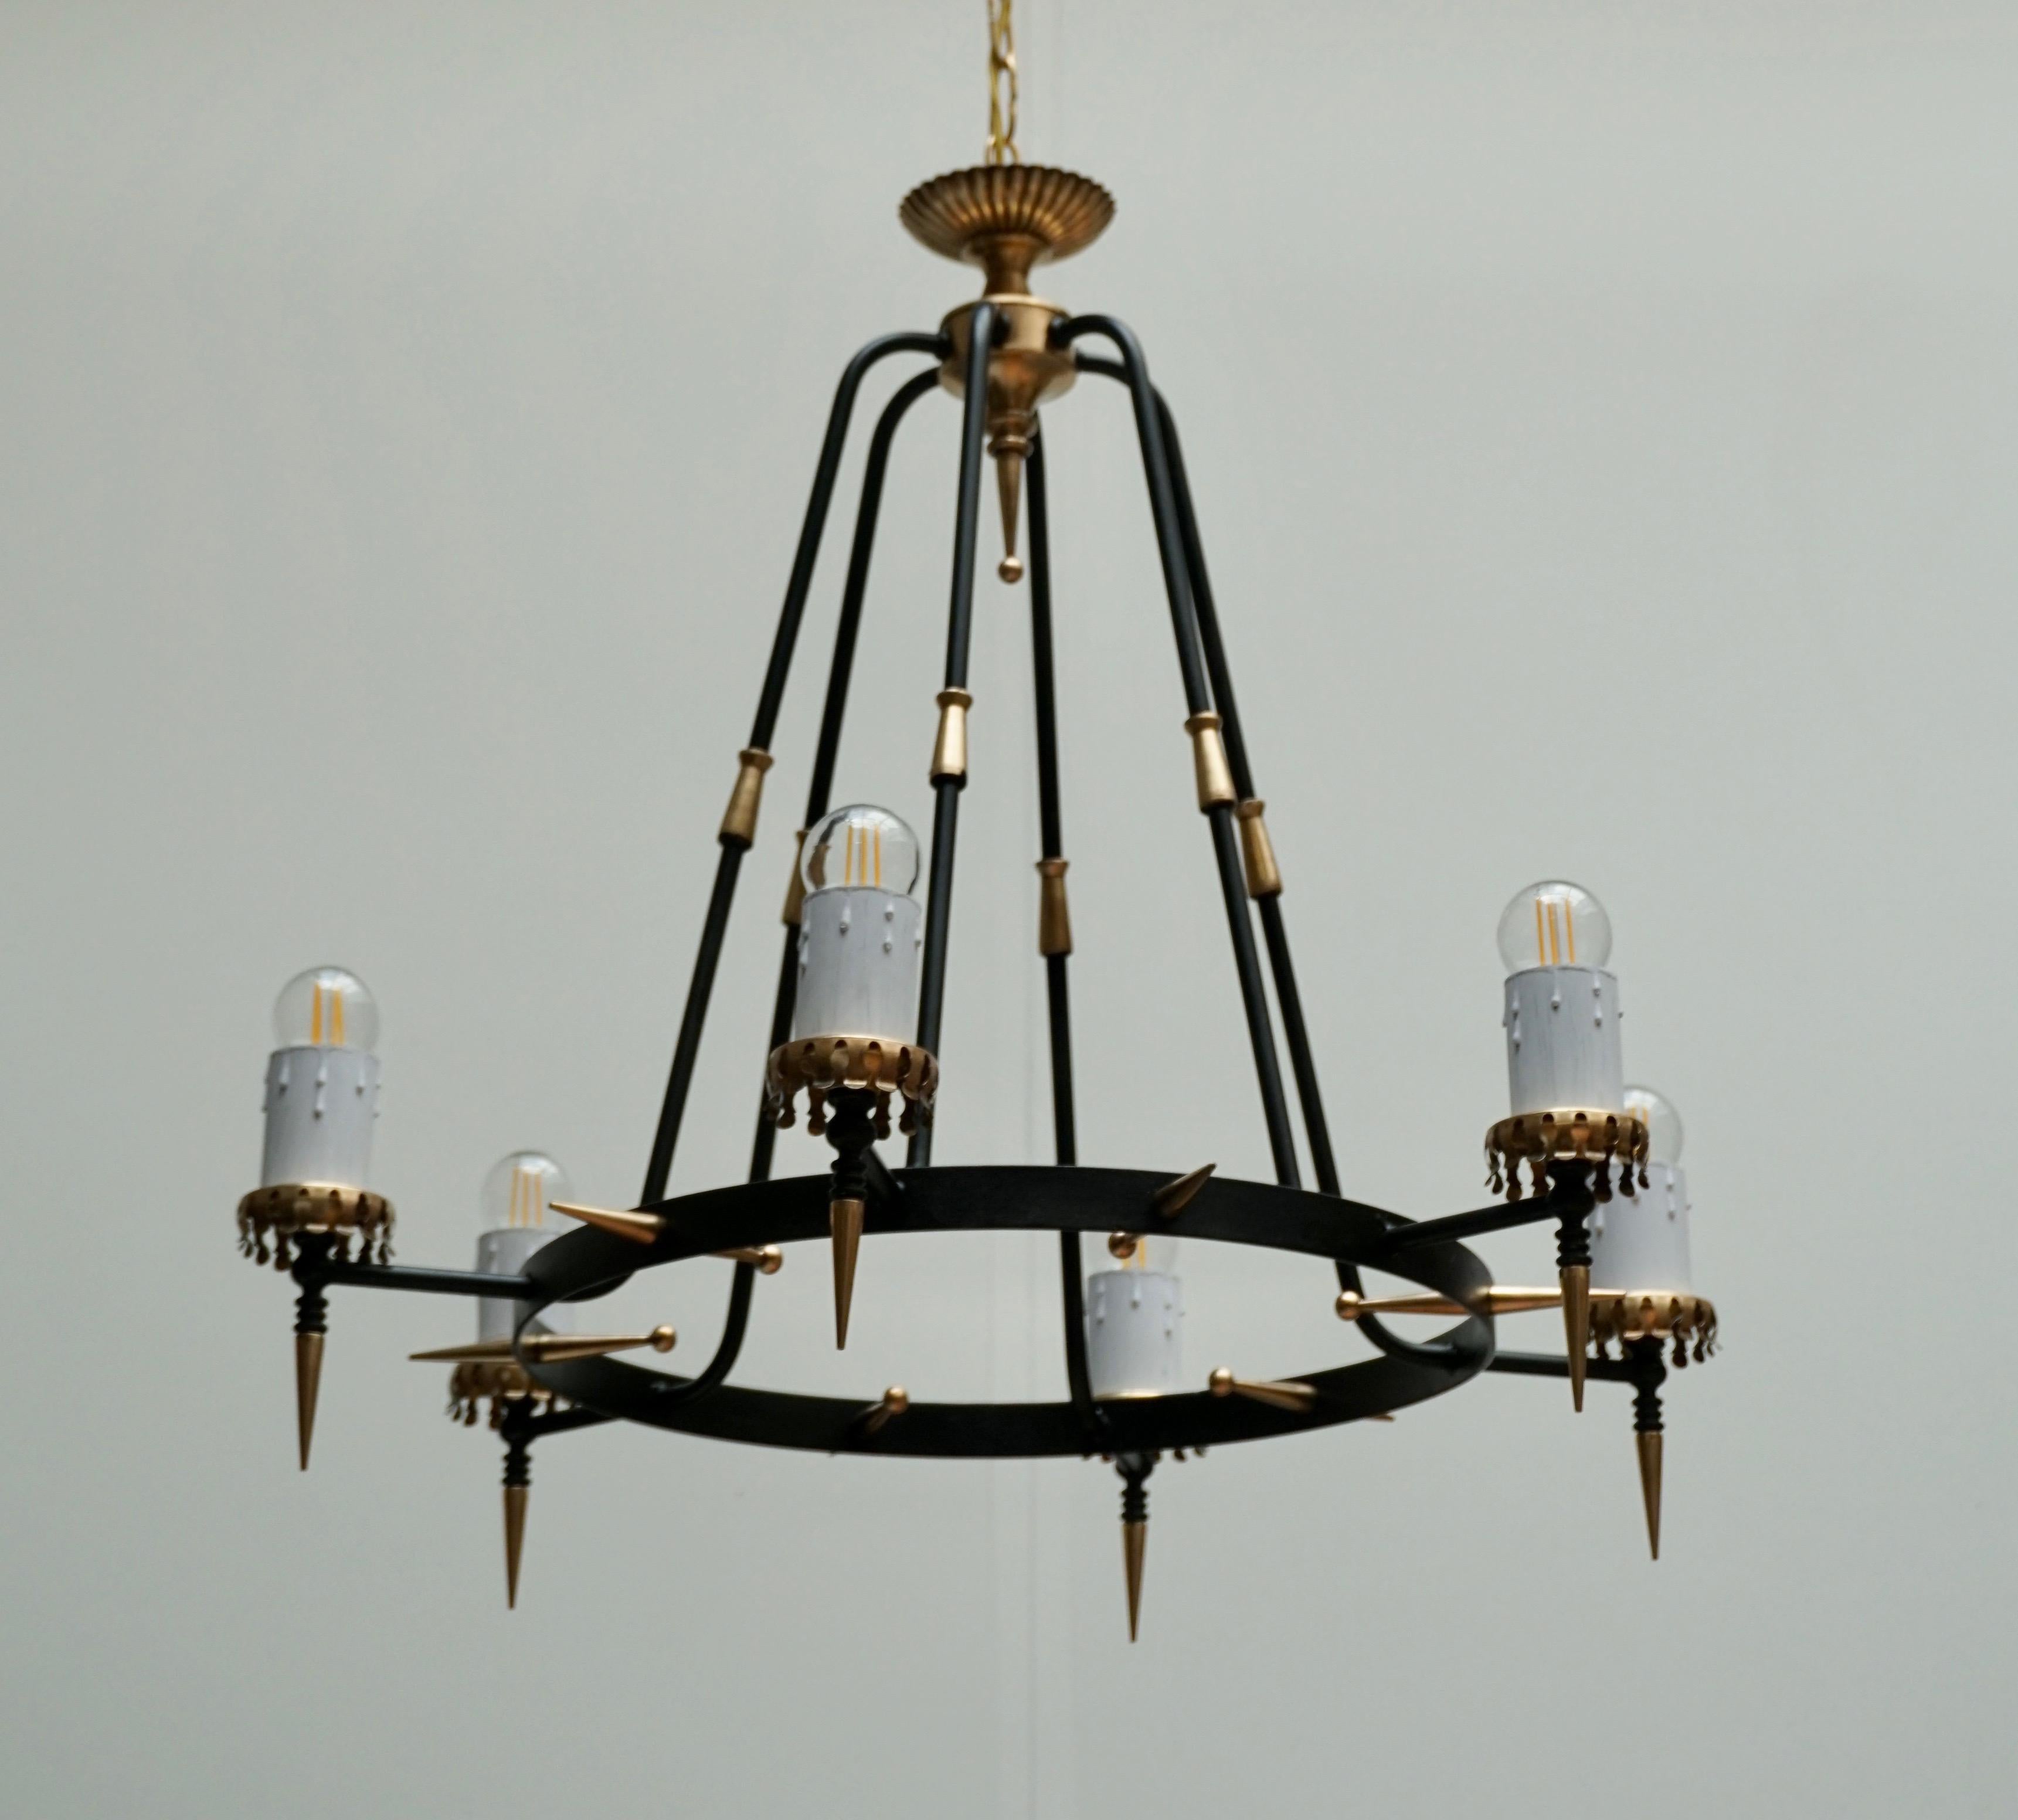 Italian chandelier in brass and black metal with six lights.

Measures: Diameter 64 cm.
Height fixture 60 cm.
Total height including the chain 110 cm.

The light requires six single E27 screw fit lightbulbs (60Watt max.) LED compatible.
